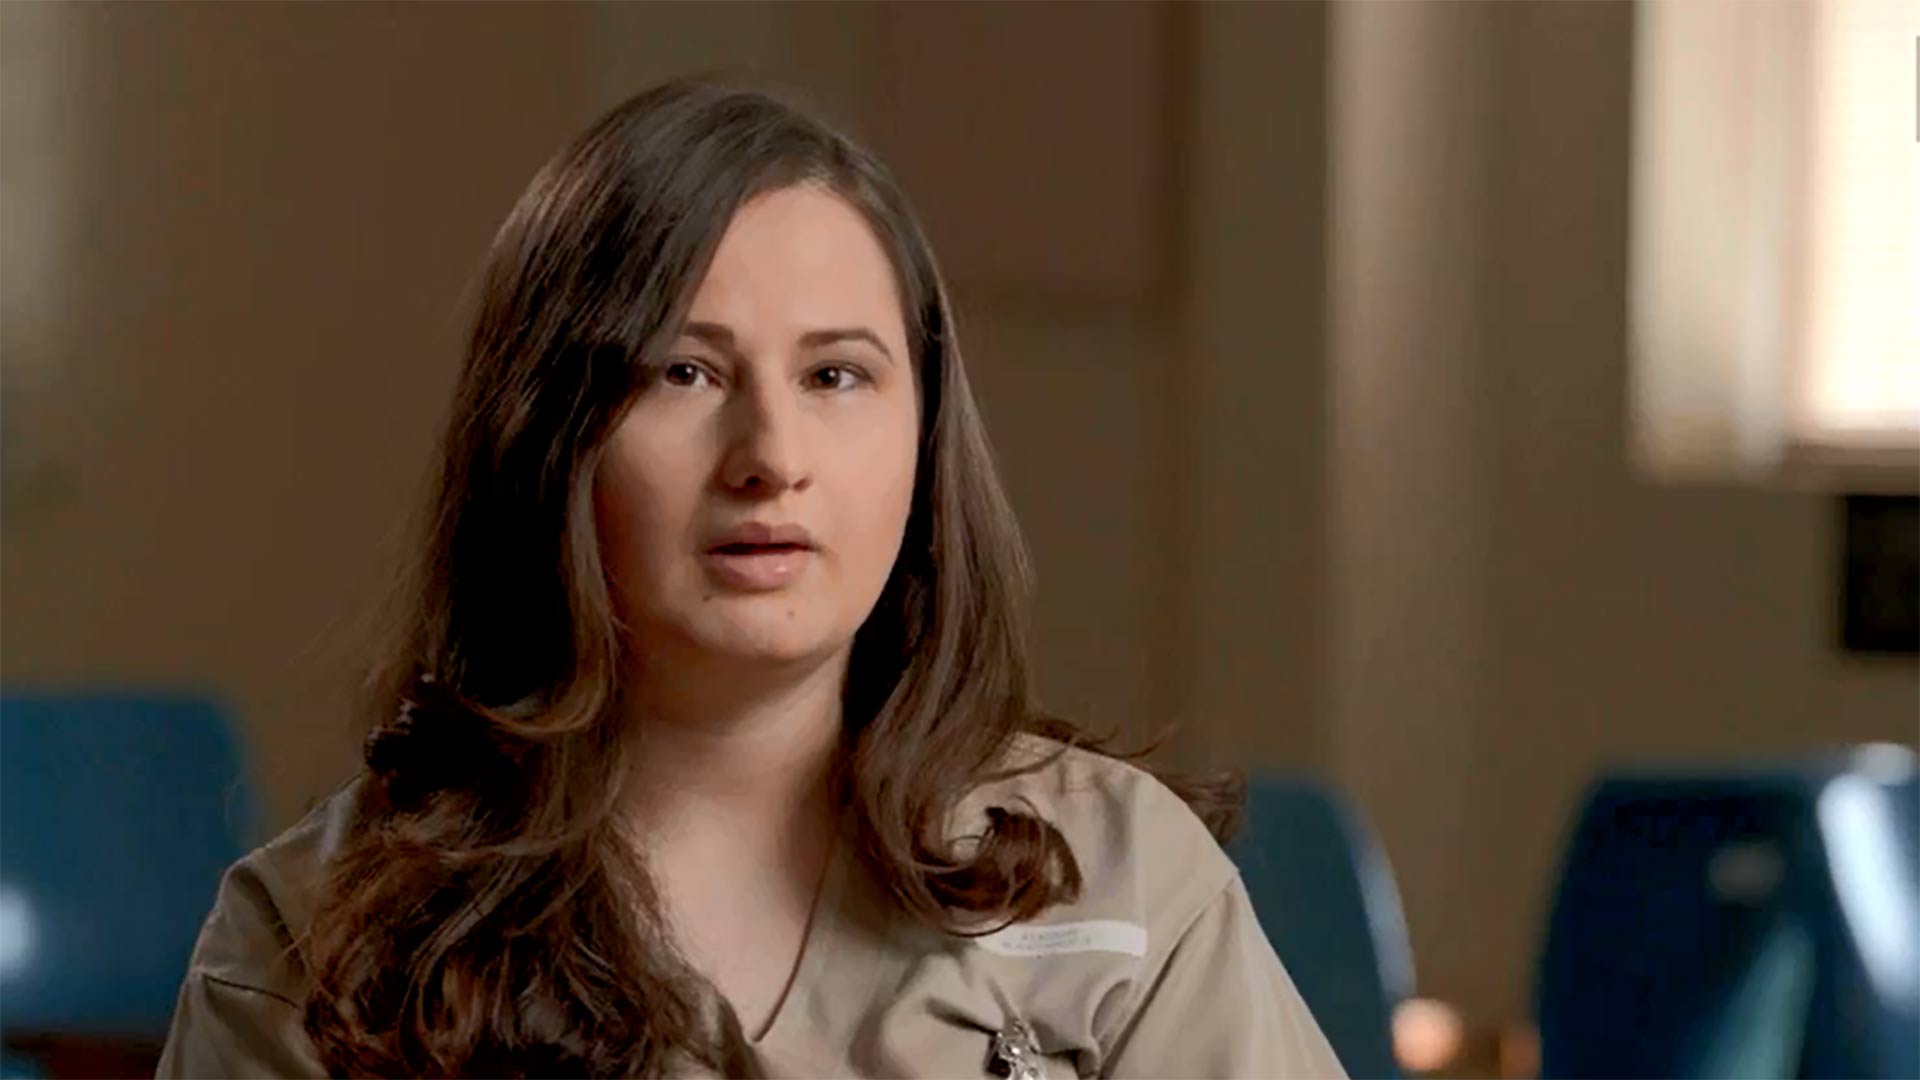 Where to Watch the Prison Confessions of Gypsy Rose Blanchard